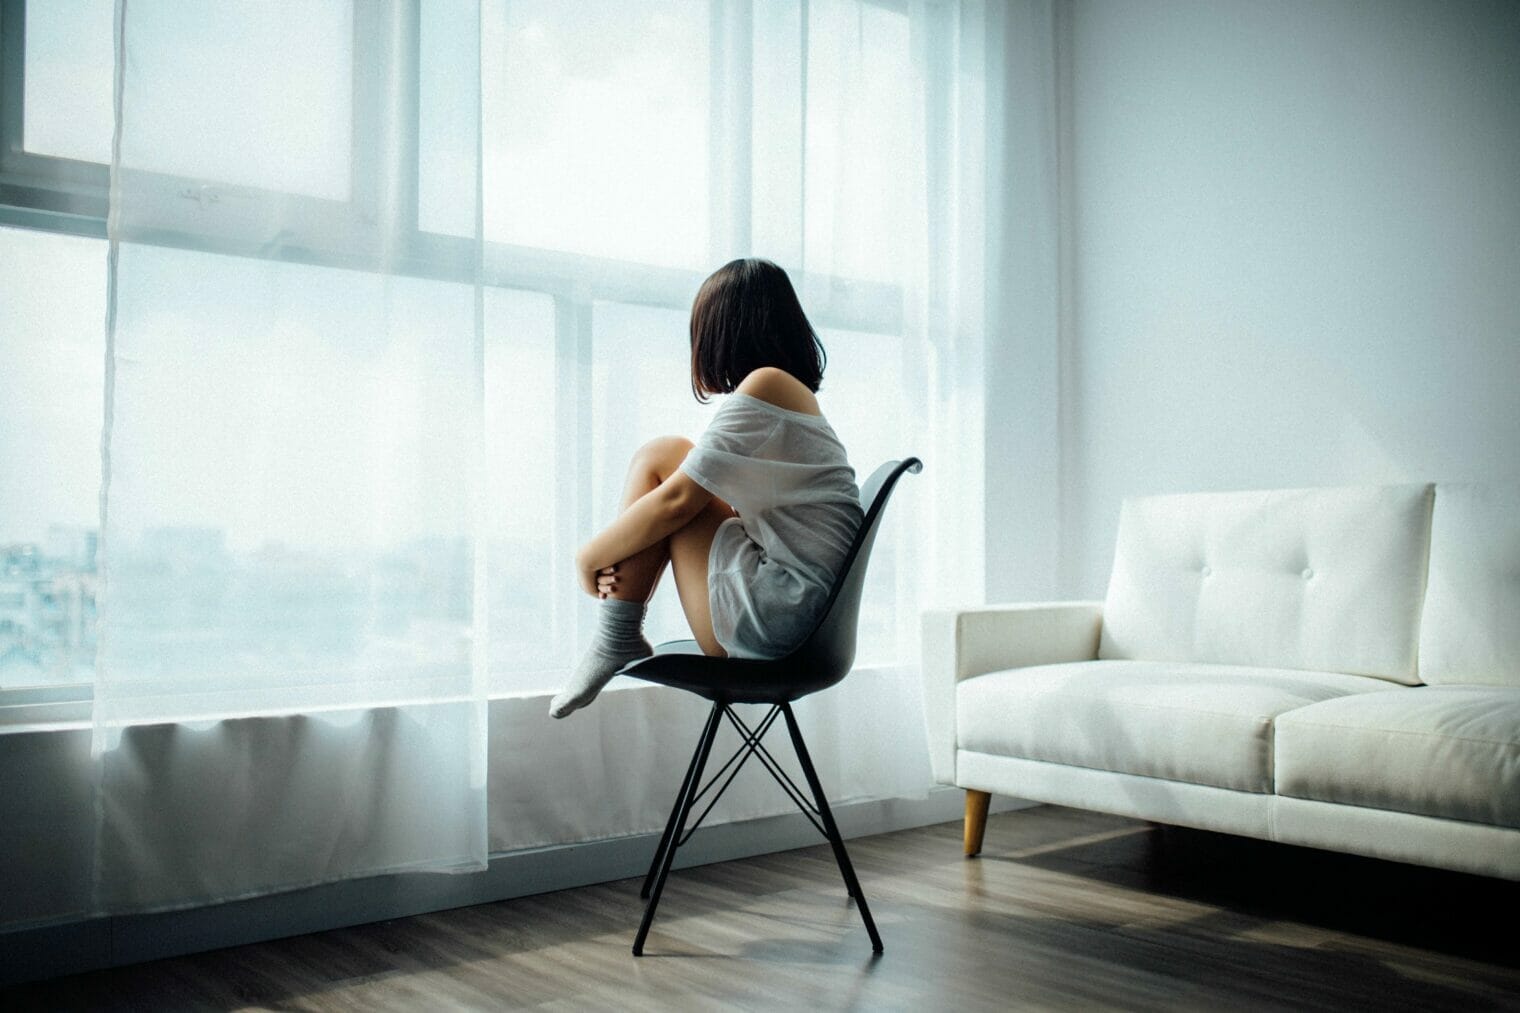 A woman sitting on a chair in front of a window, reflecting on the pressing workforce shortage and the need for improved mental healthcare.